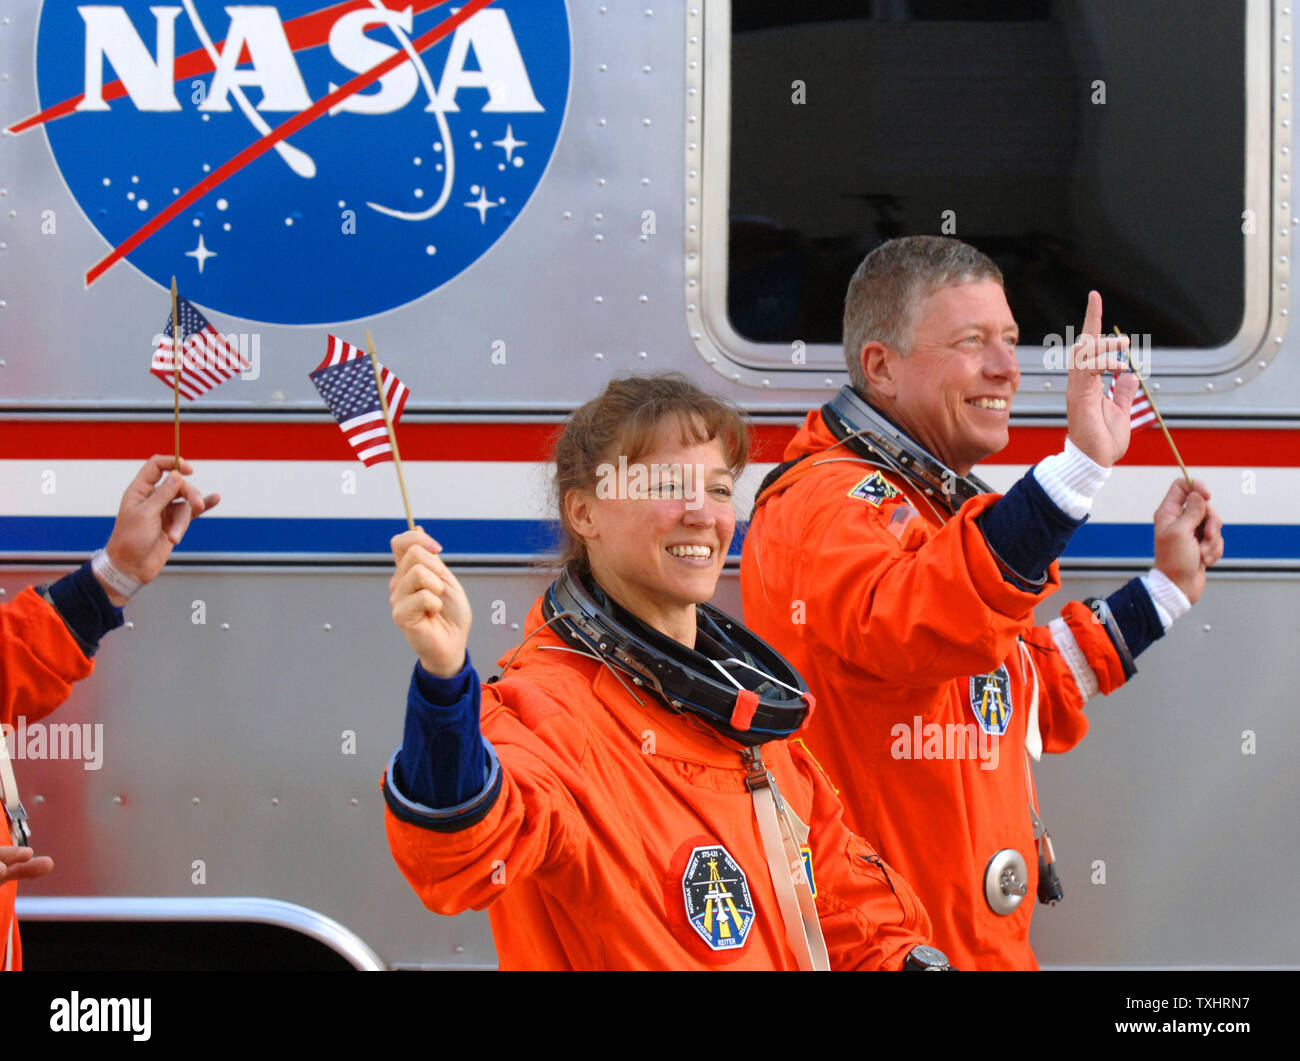 Mission Specialists  Lisa Nowak and Michael Fossum wave American flags as they walk out of the Operations and Checkout Building to board the NASA Astrovan en route to the Space Shuttle Discovery for mission STS-121 at Cape Canaveral, Florida on July 4, 2006. (UPI Photo/Pat Benic) Stock Photo